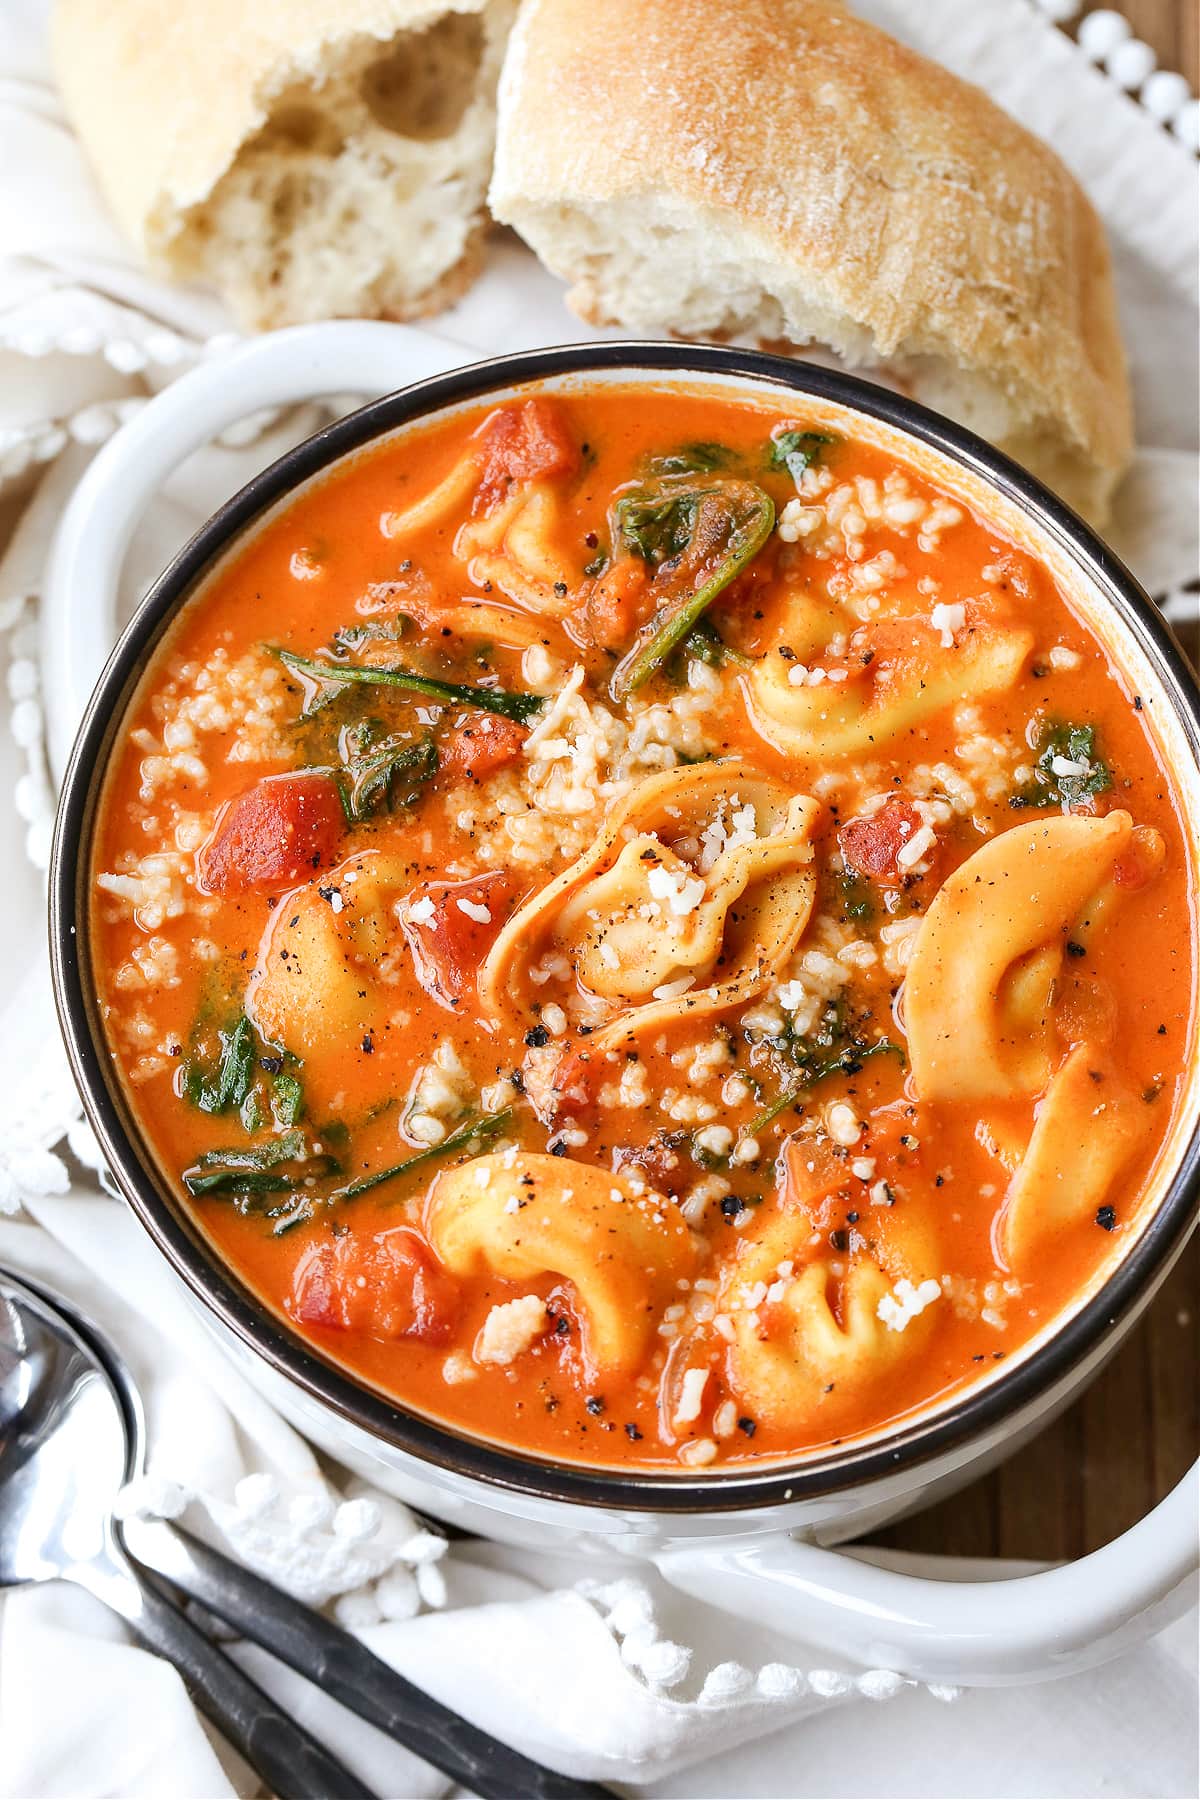 tomato tortellini soup in white bowl with bread on the side